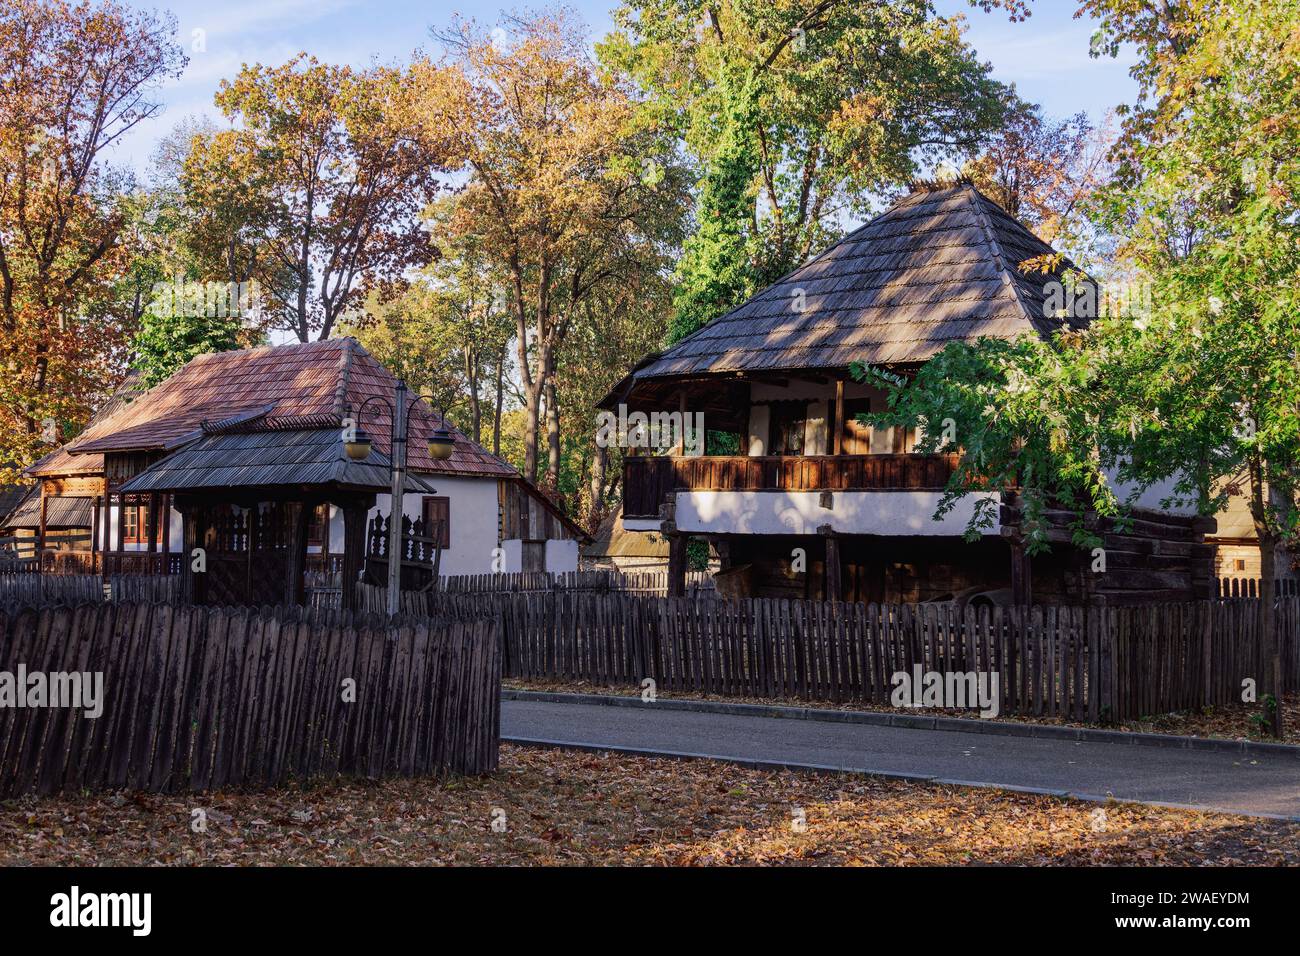 Authentic peasant settlements exhibiting traditional Romanian village life inside Dimitrie Gusti National Village Museum in Bucharest. Stock Photo